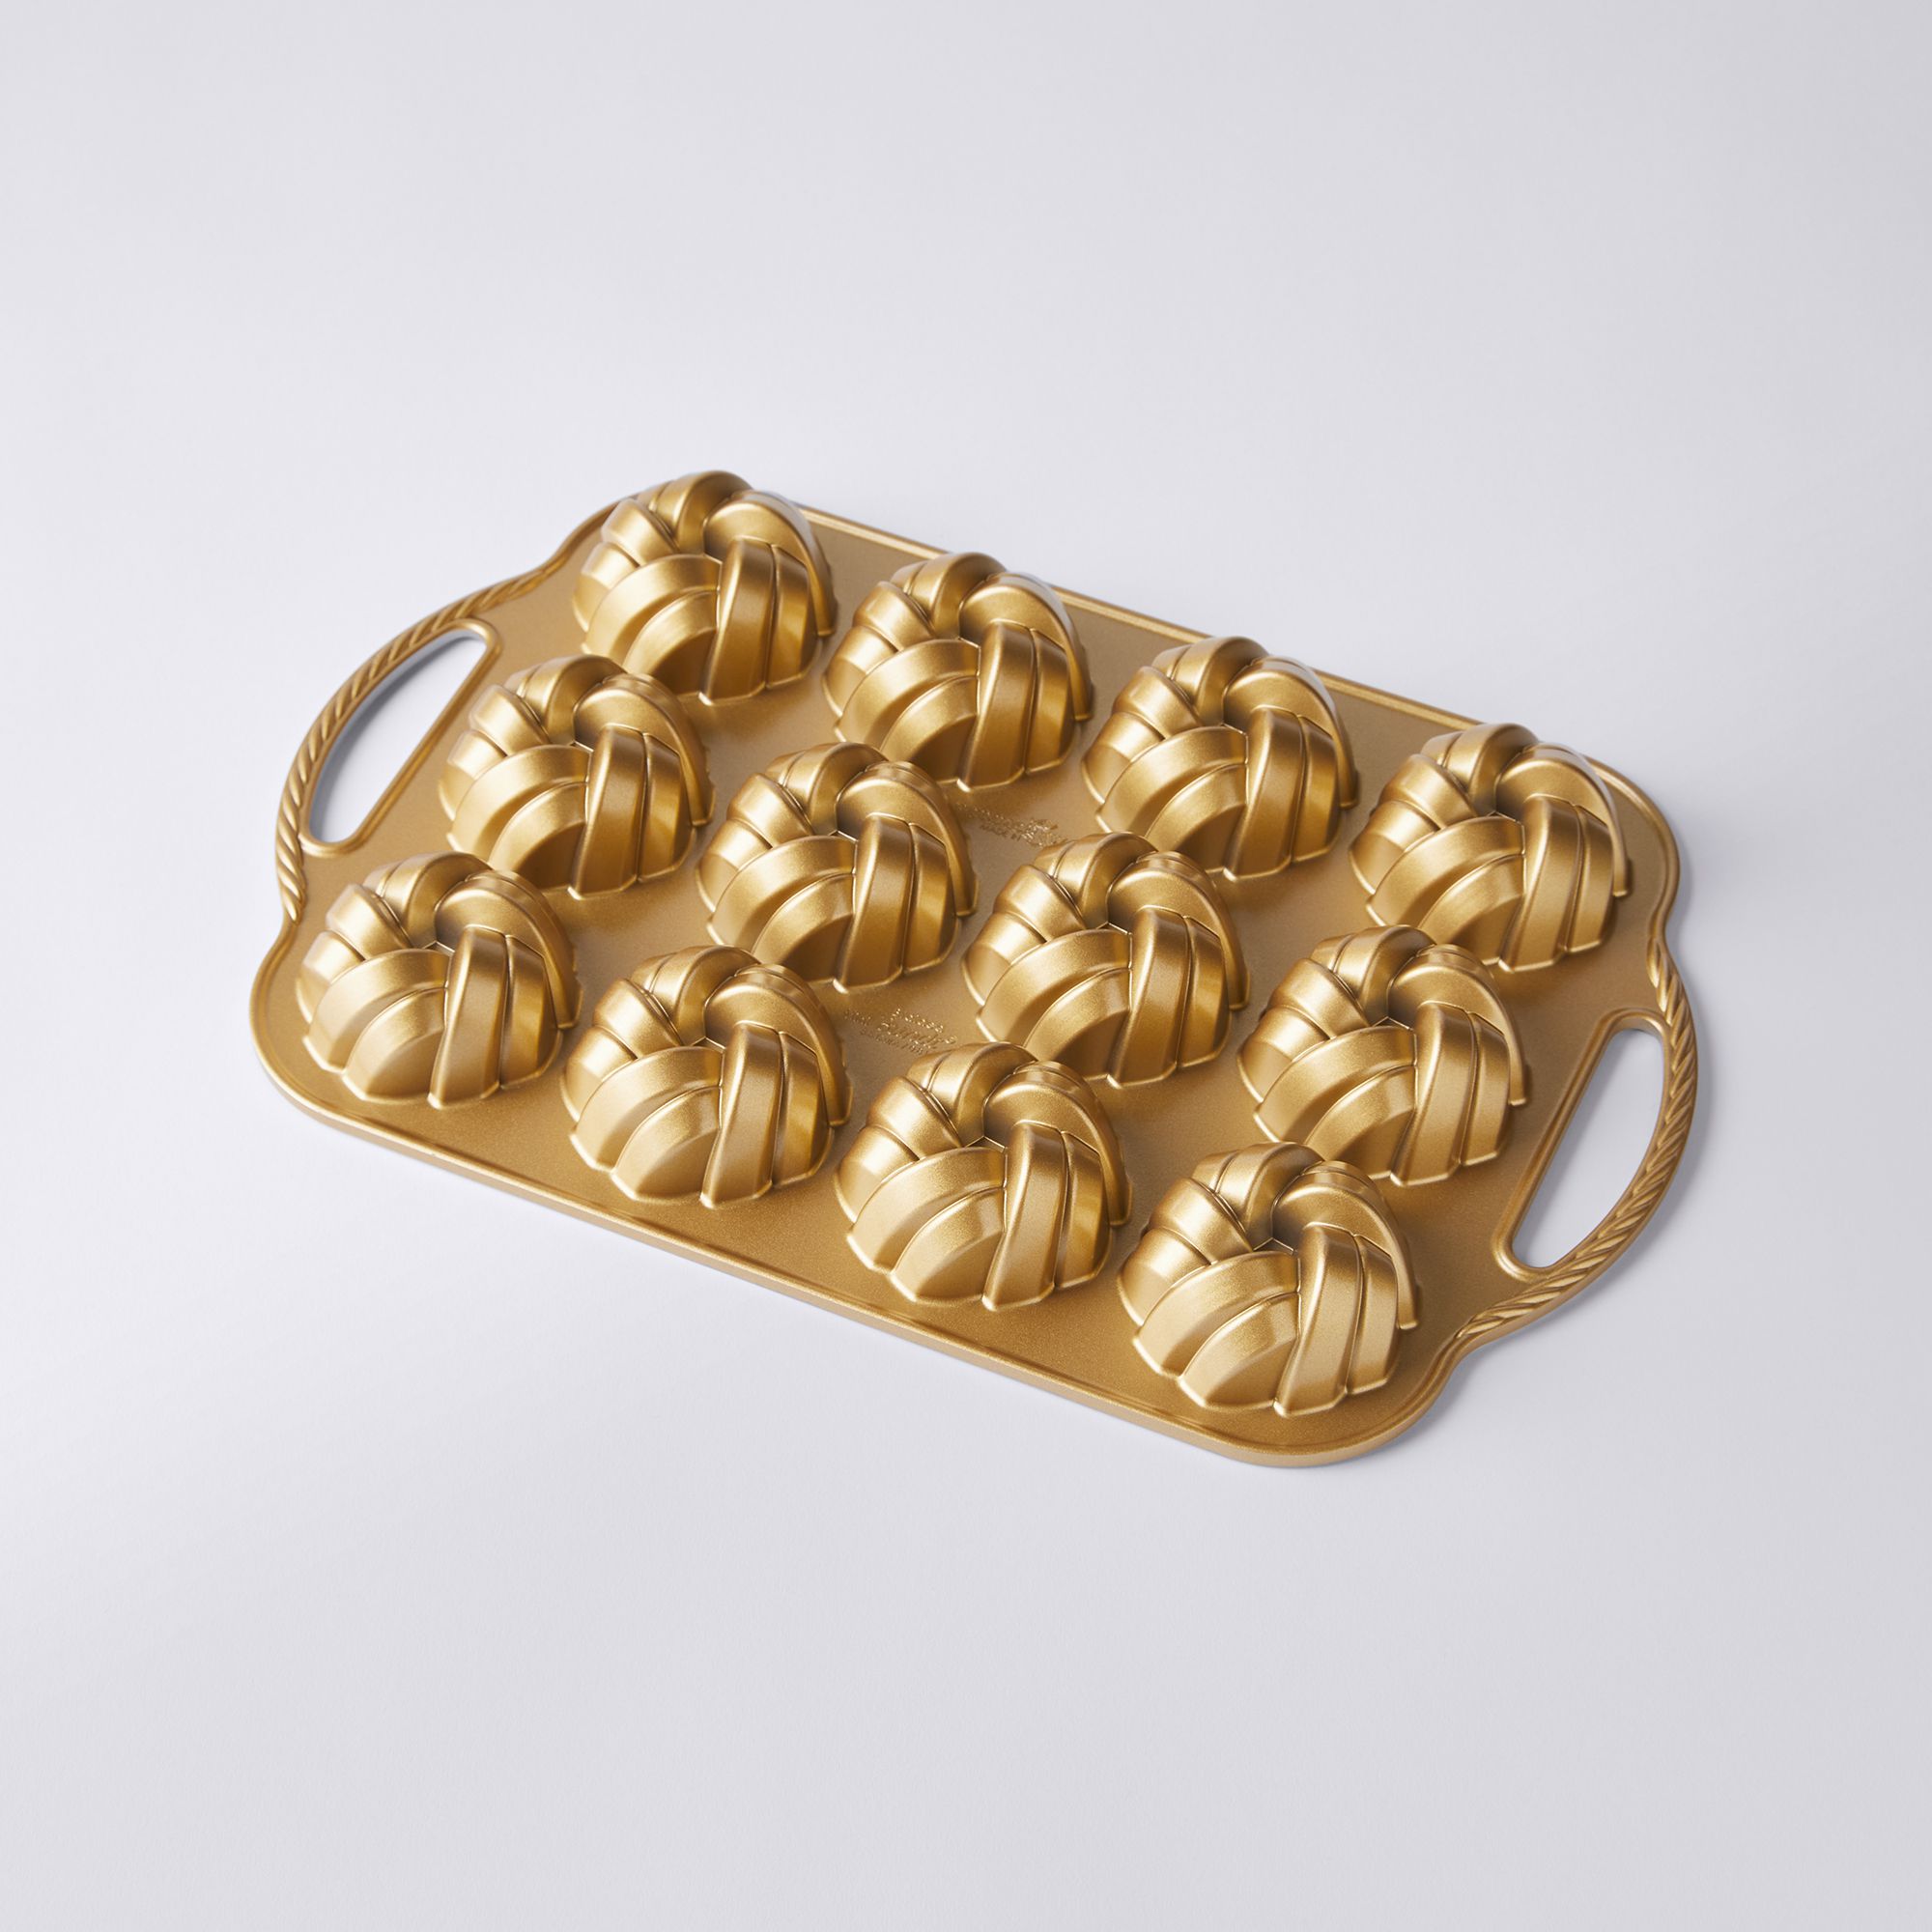 Nordic Ware 75th Anniversary Braided Cakelet Pan on Food52